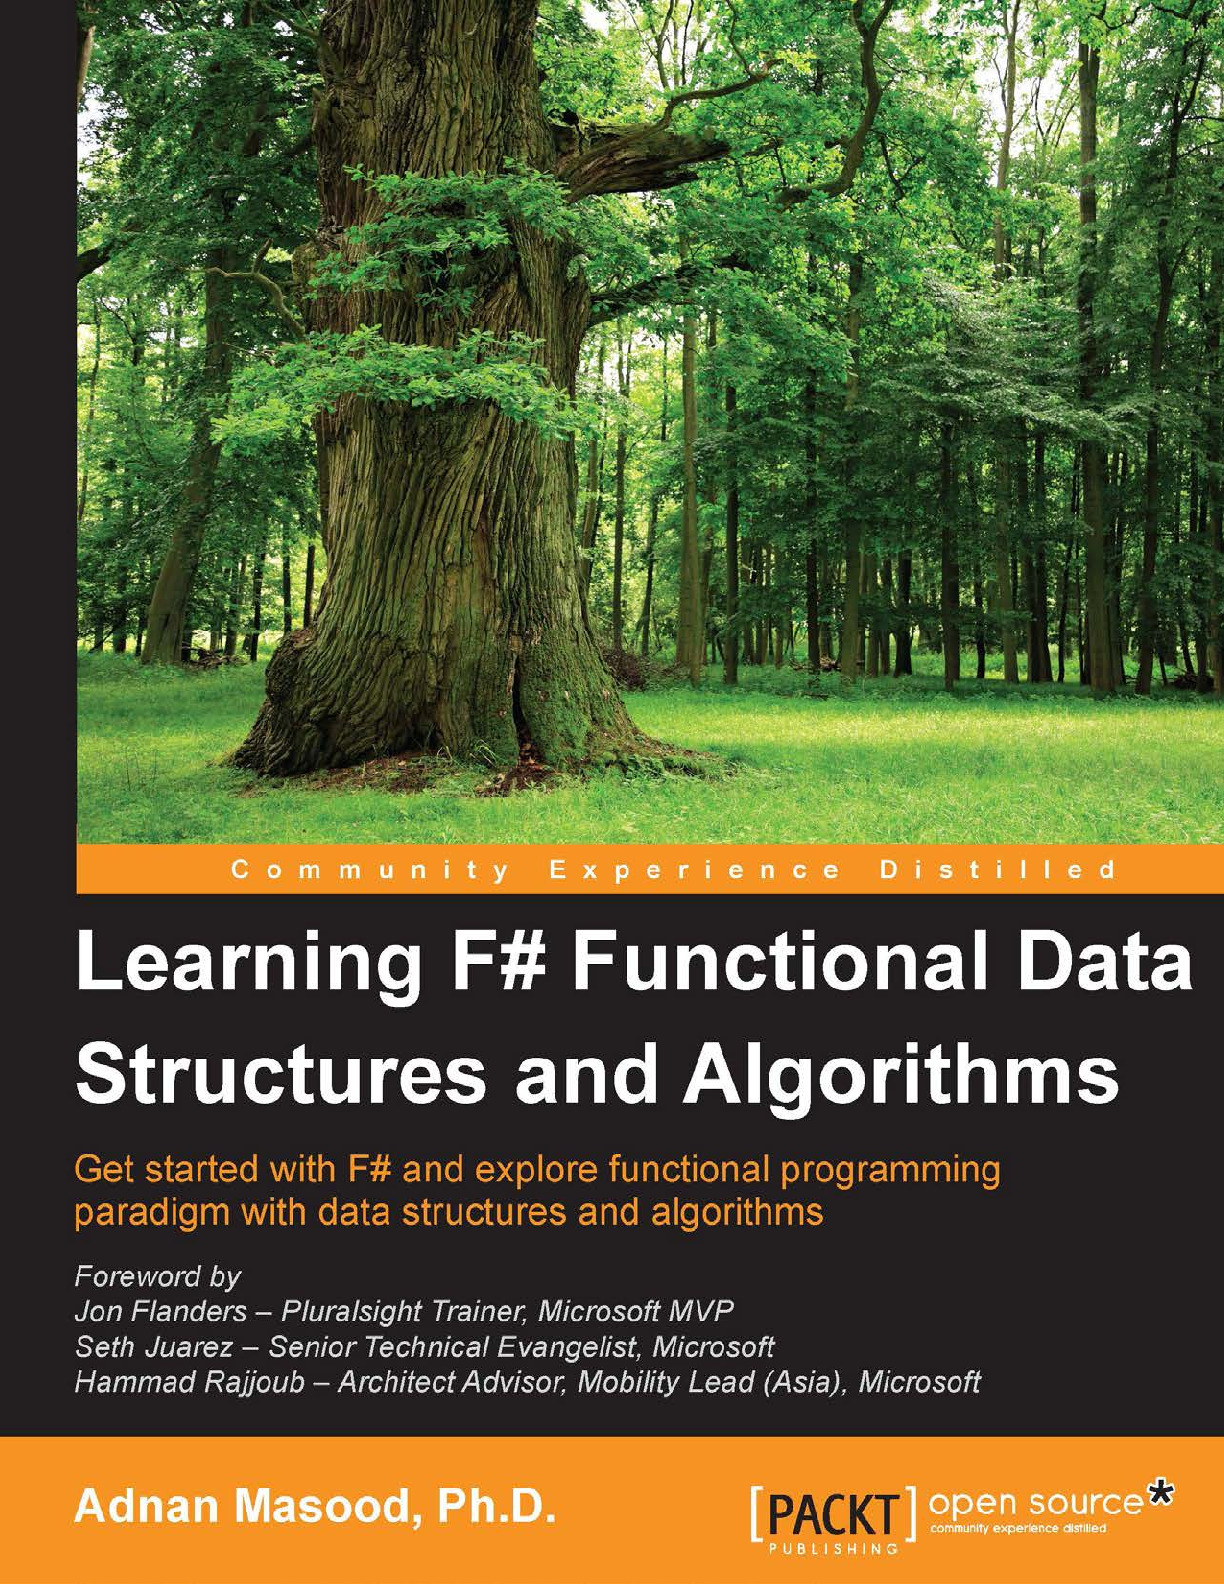 Learning F# Functional Data Structures and Algorithms